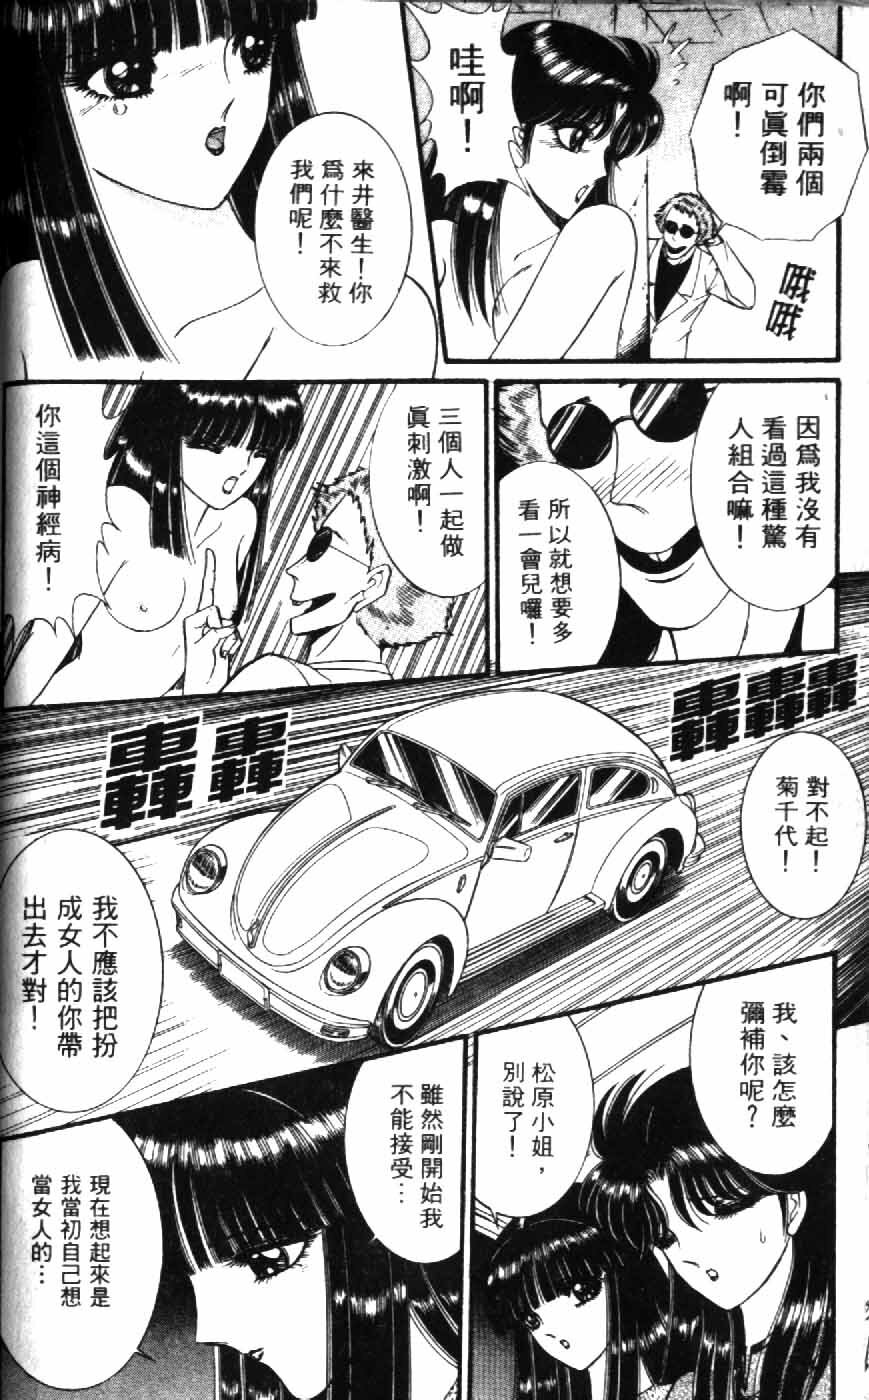 [Senno Knife] Ouma ga Horror Show 1 - Trans Sexual Special Show 1 | 顫慄博覽會 1 [Chinese] page 40 full